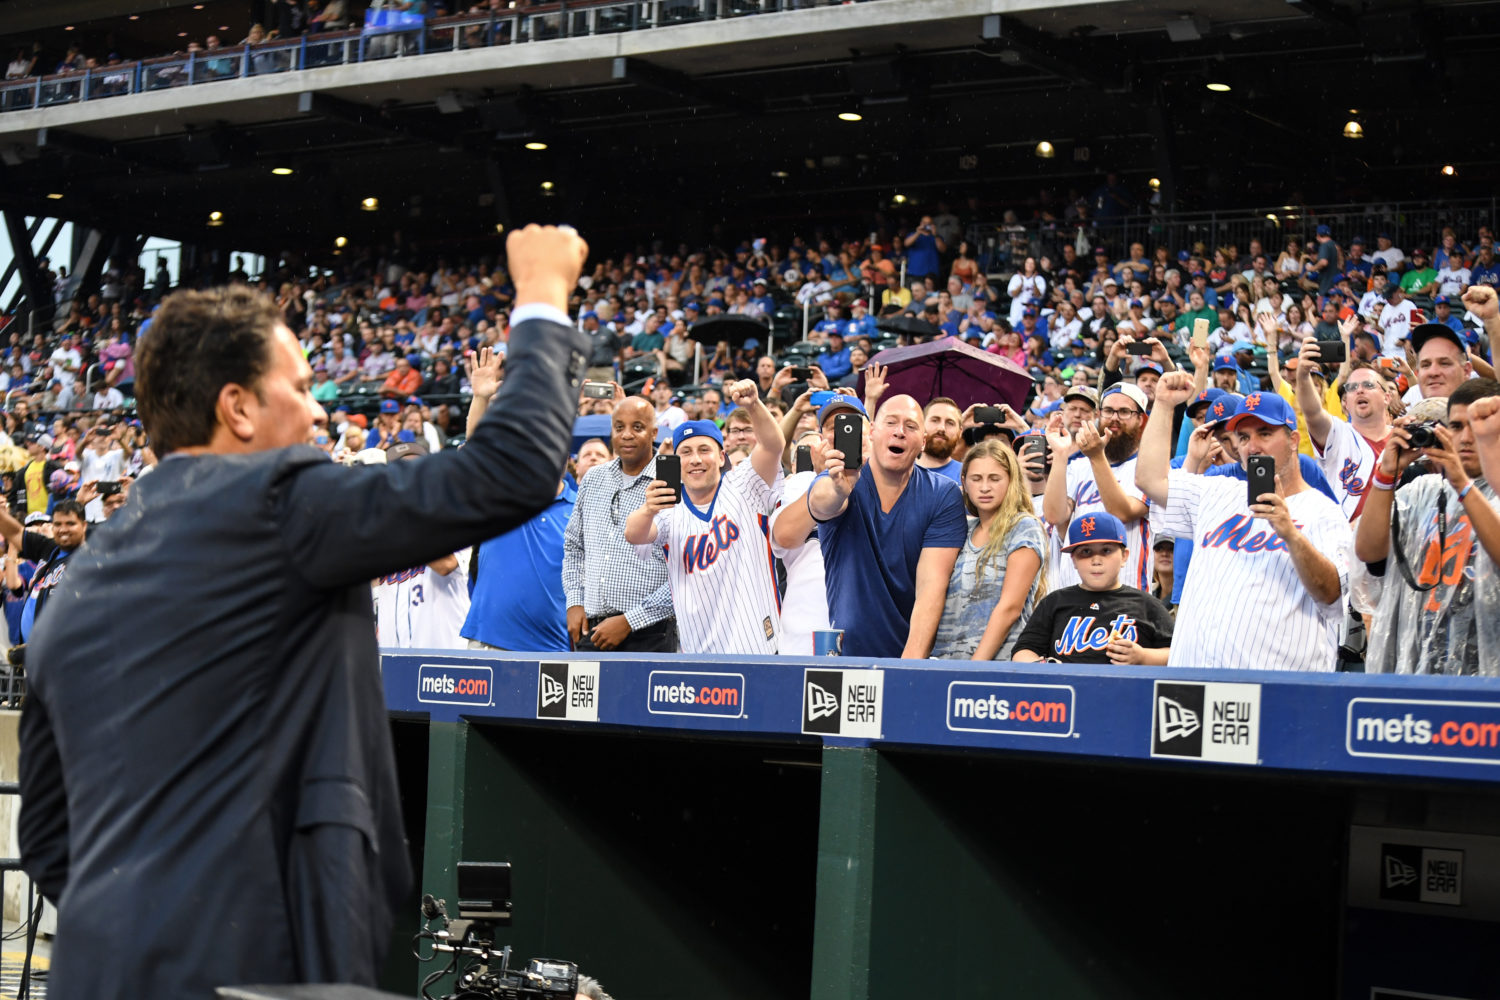 Piazza Gets Standing Ovation at Number Retirement